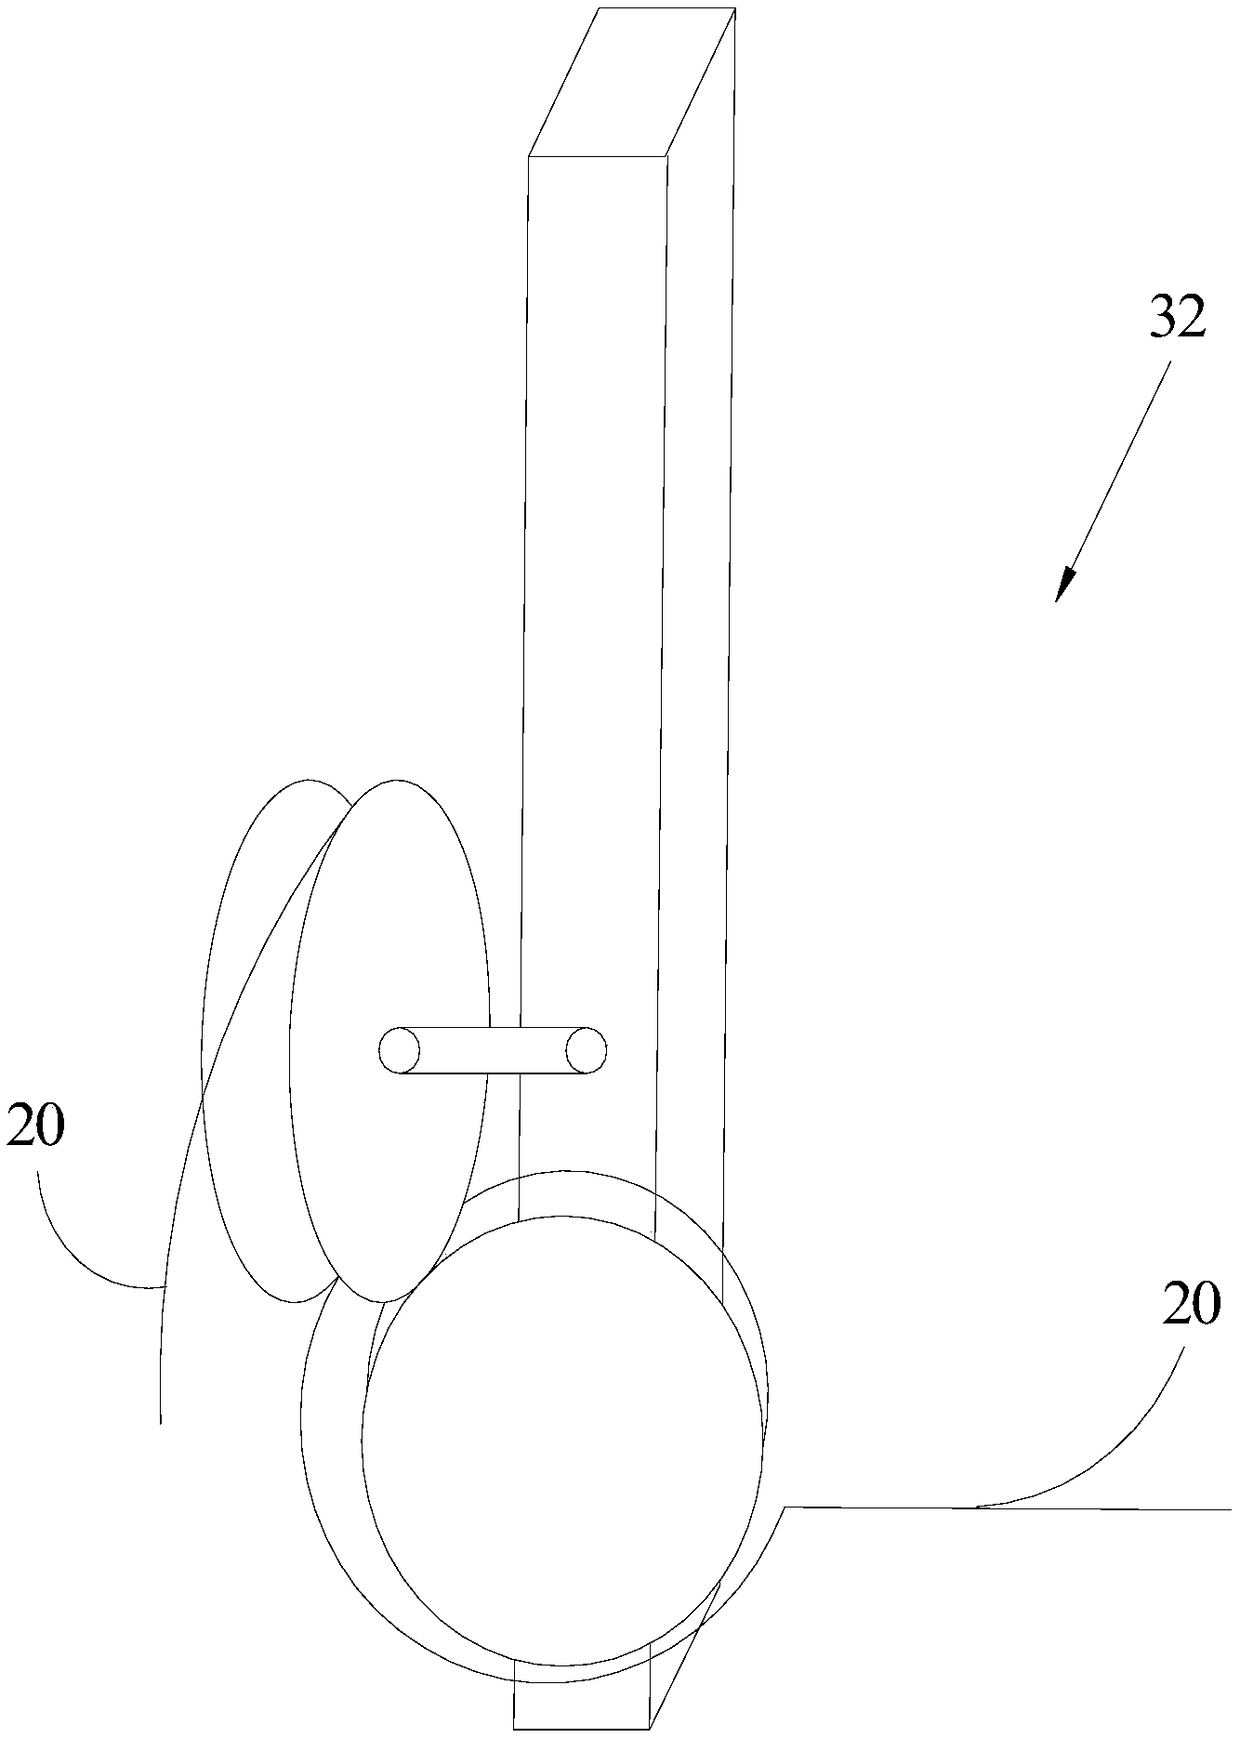 Construction method of orientated rope saw dismounting of large-size reinforced concrete